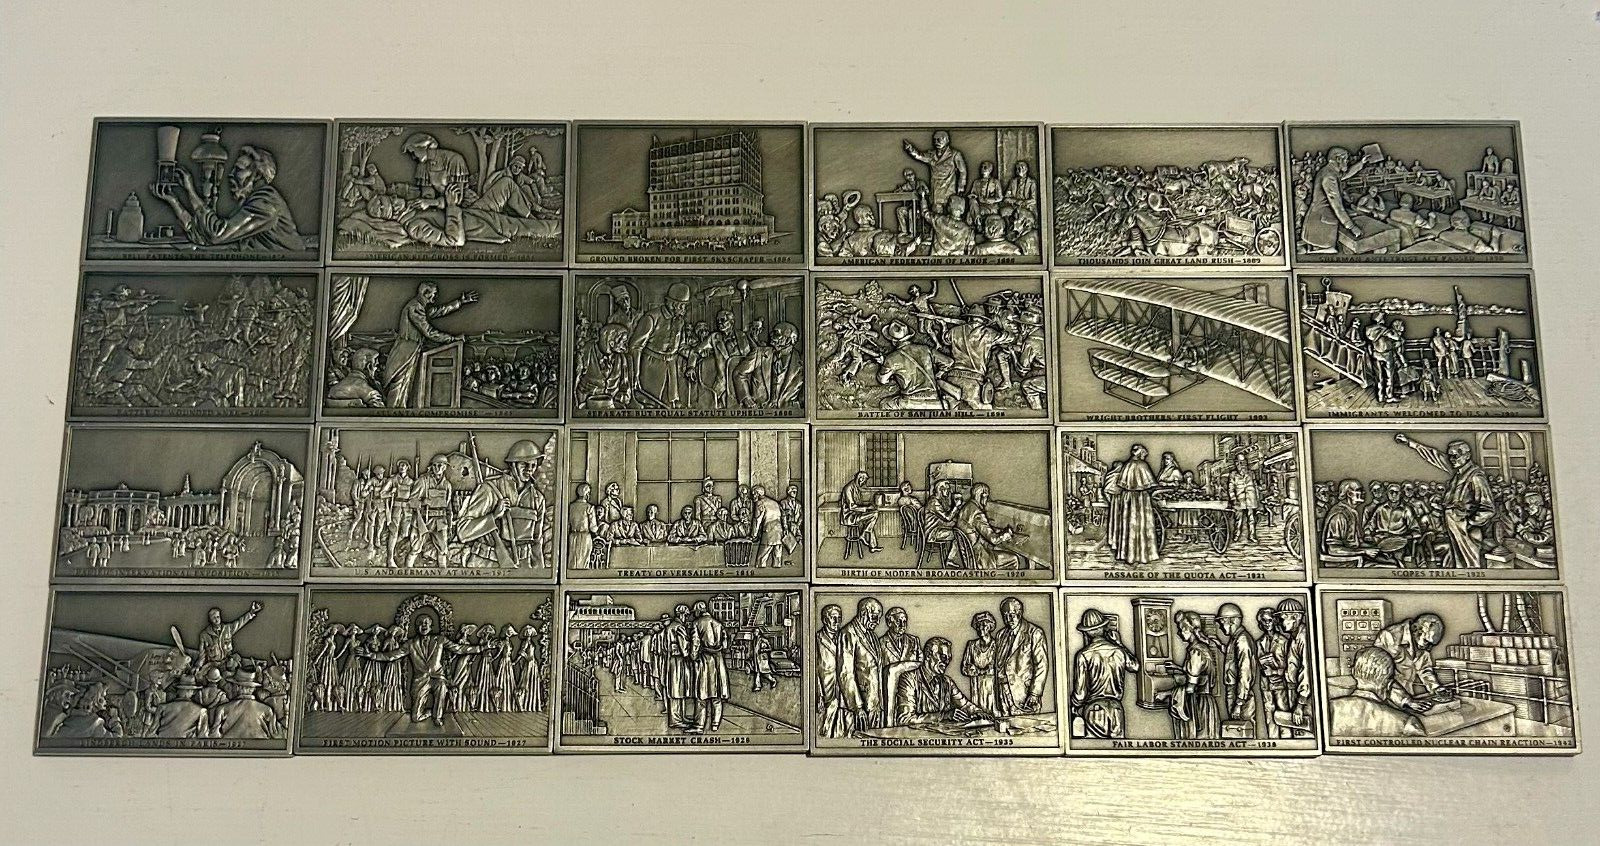 Franklin Mint Bicentennial History of the US PEWTER Lot of 24 Ingots - 1970s